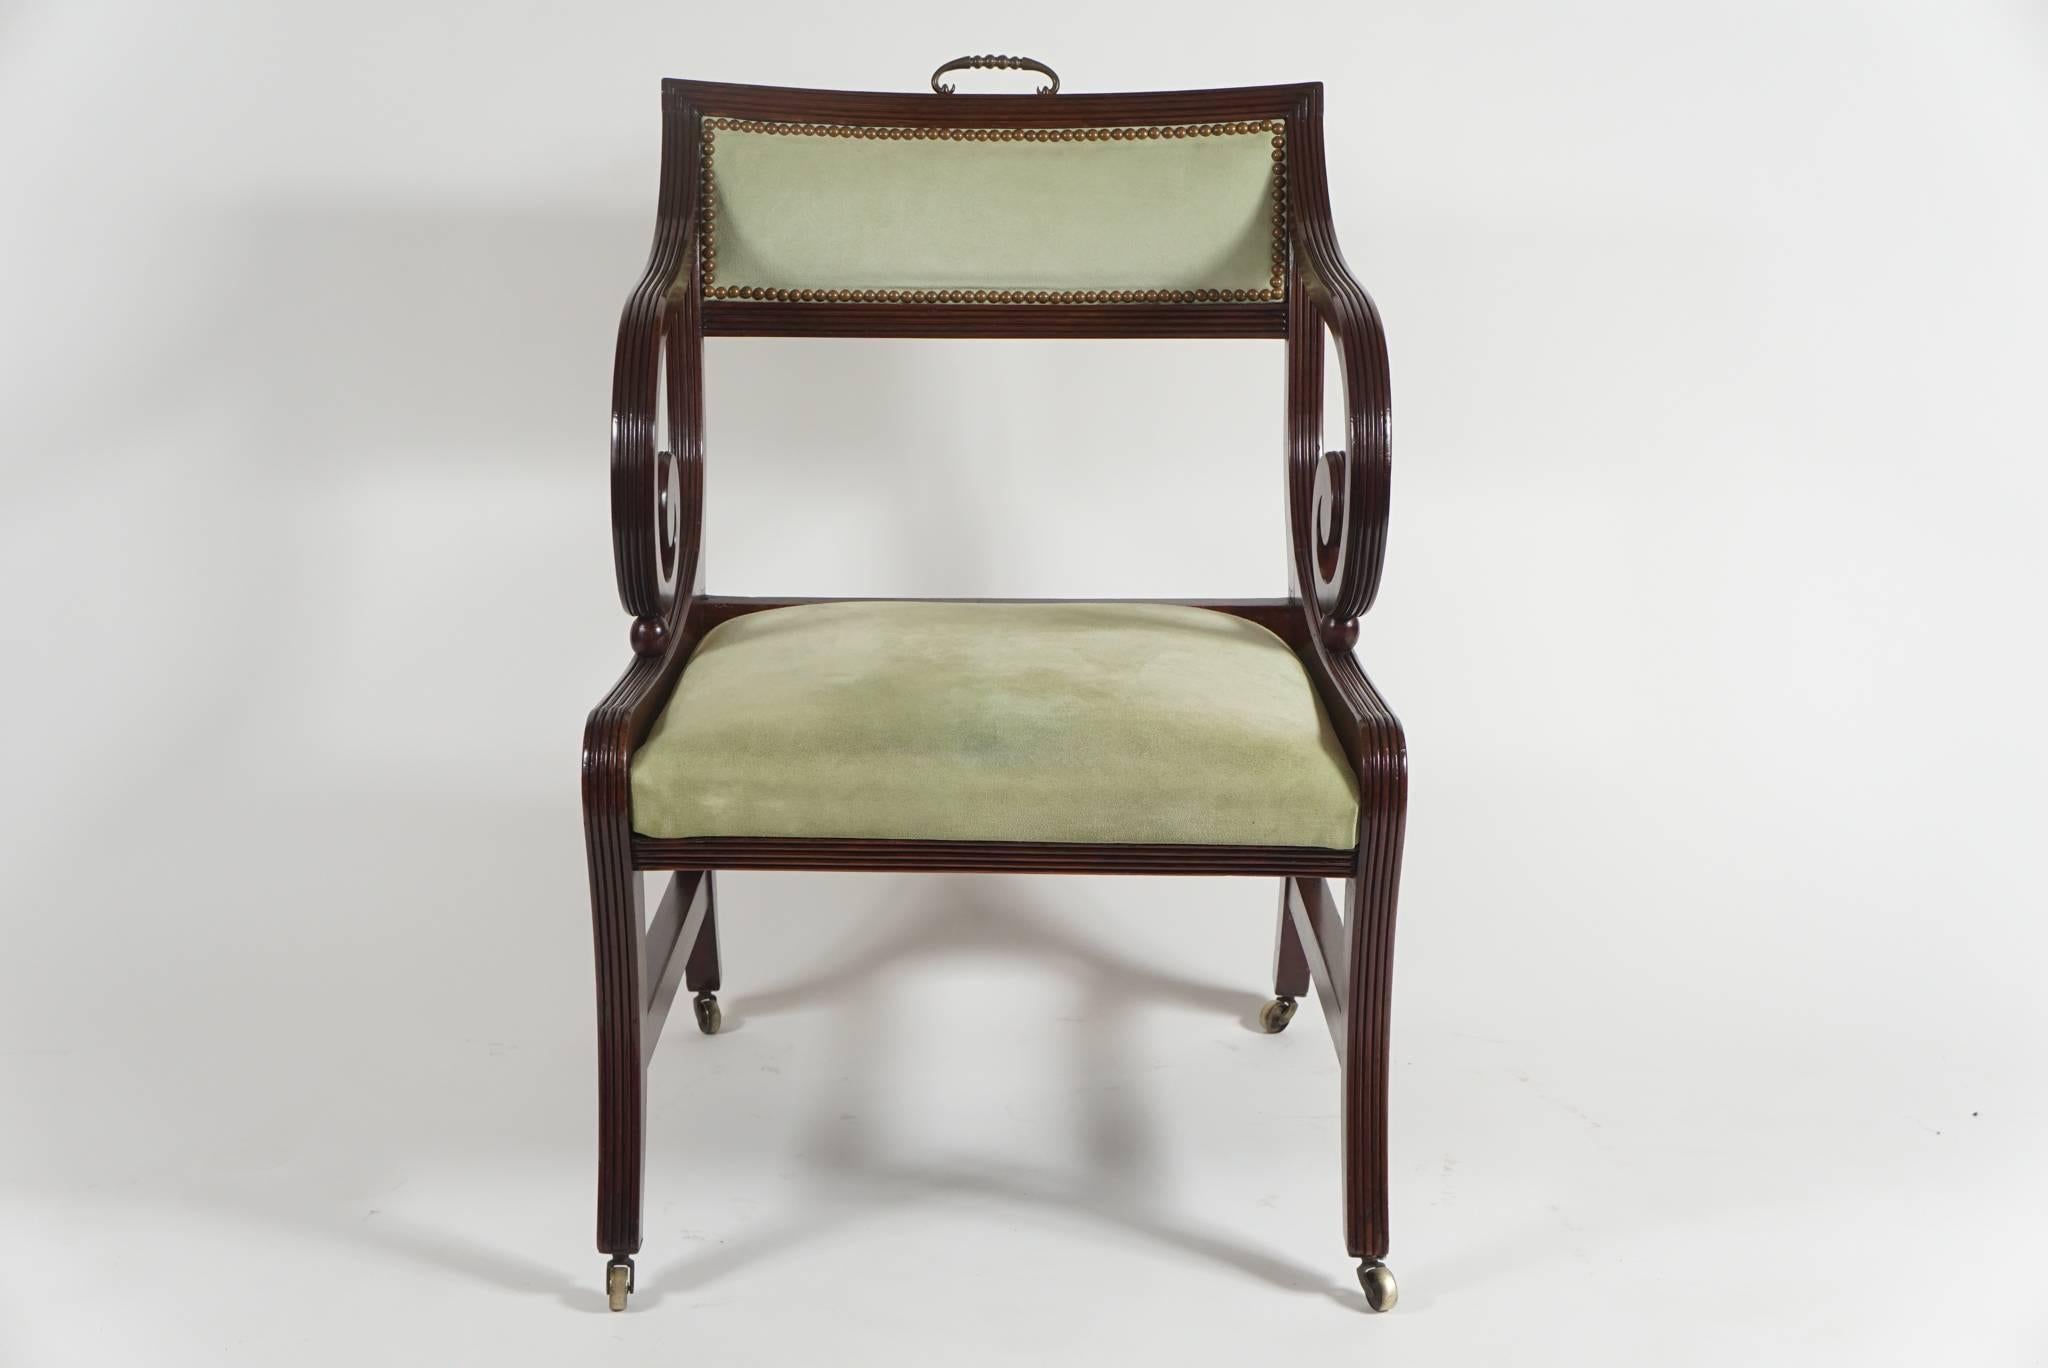 English Regency period klismos-form armchair or library chair, circa 1815, of large scale having solid mahogany frame with curved tablet form backrest with brass handle issuing reeded scrolling arms, connecting to reeded-edge frame with slip-seat,